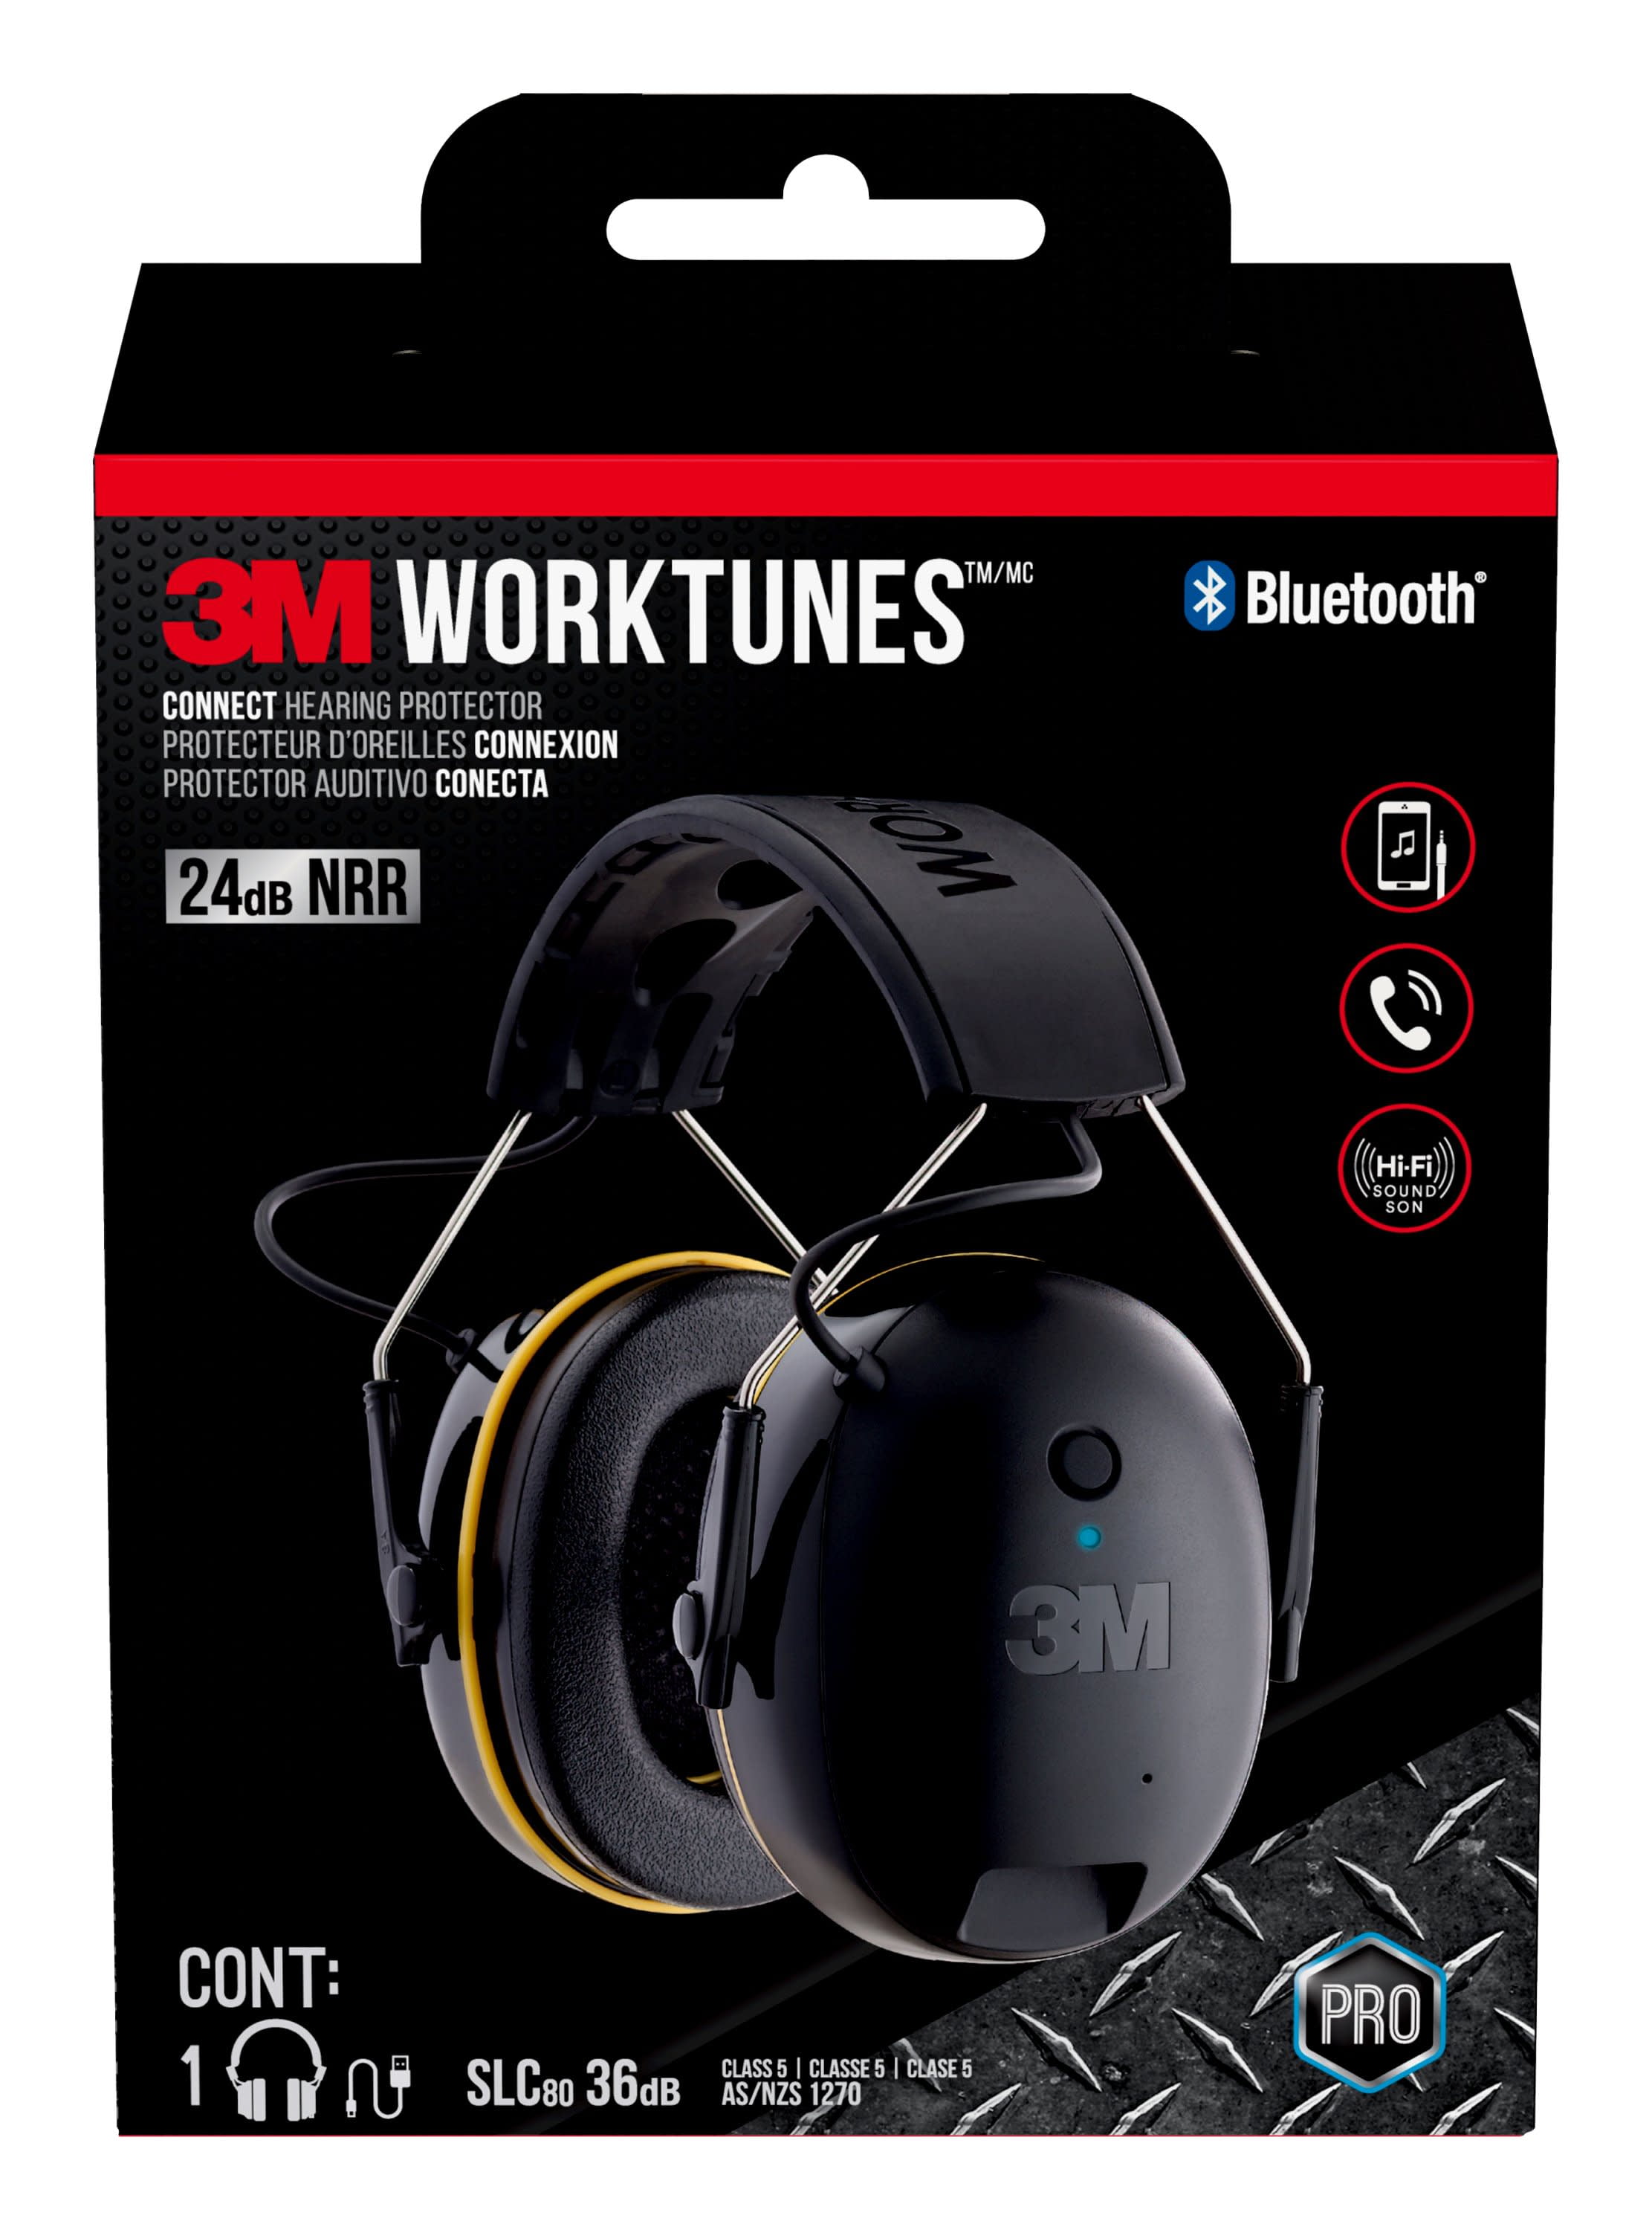 3M WorkTunes Connect Ear Protection with Bluetooth, Rechargeable Battery,  Audio and Voice Assist, Ear Muffs